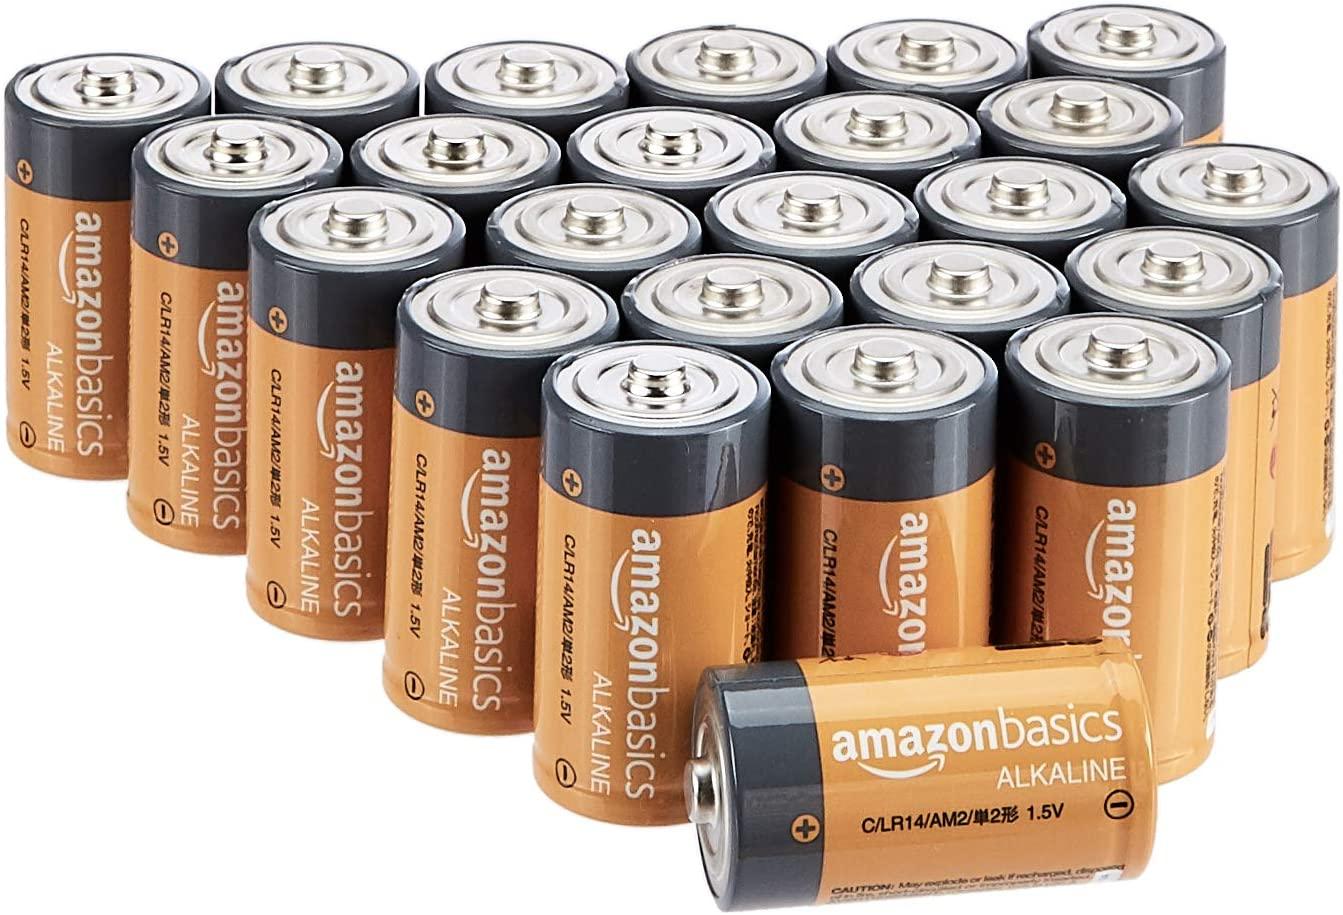 Amazon Basics C Cell All Purpose Alkaline Batteries 24 Count for $4.29 Shipped